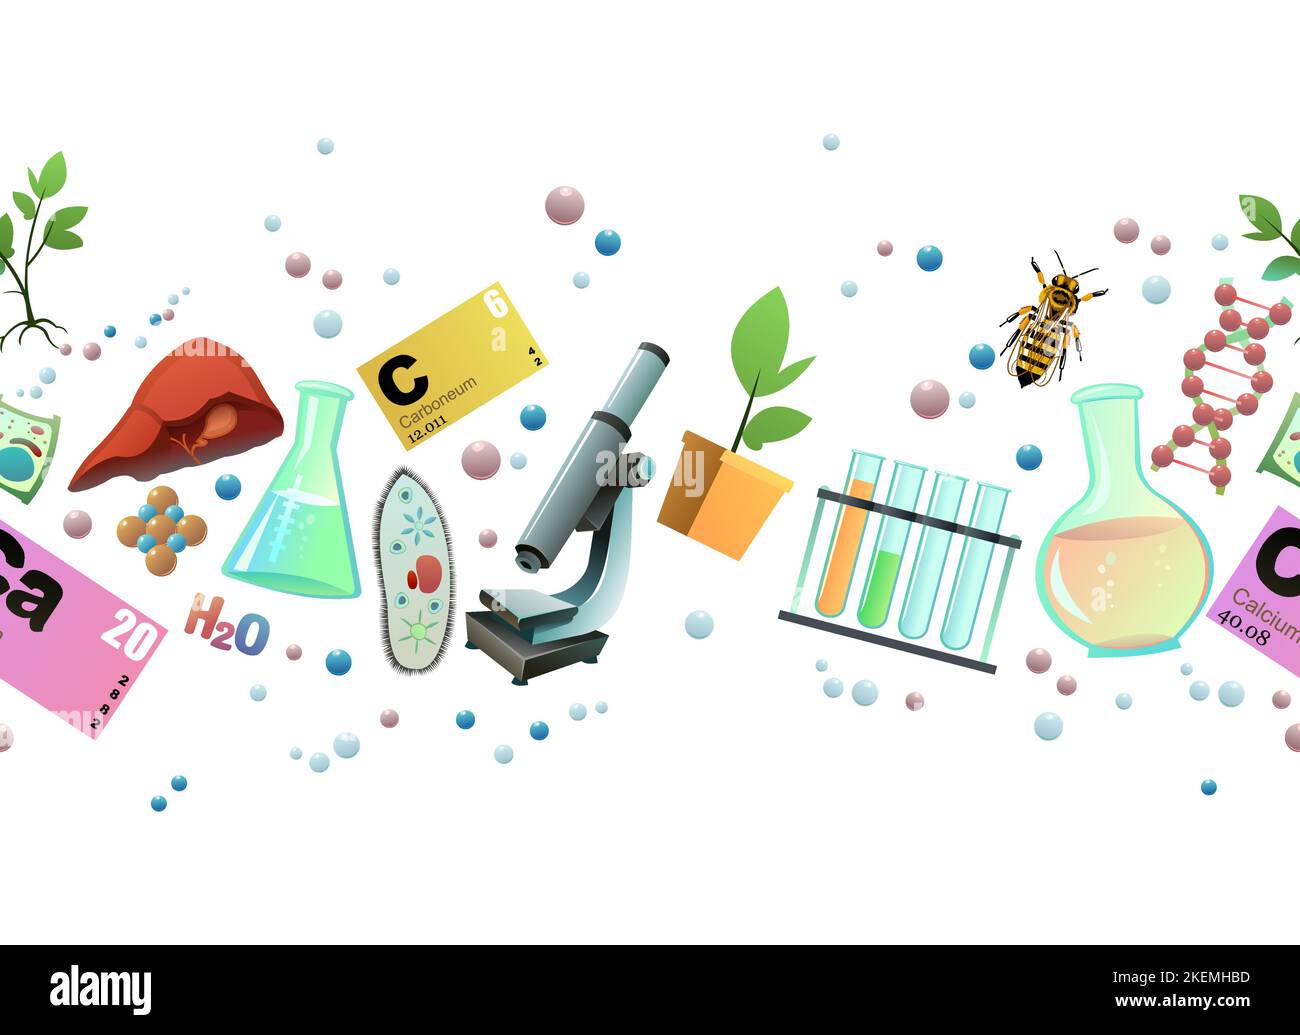 Chemistry seamless horizontal. Cartoon style. Science items picture. Study of living cells of plants, animals and humans. Isolated on white background Stock Vector